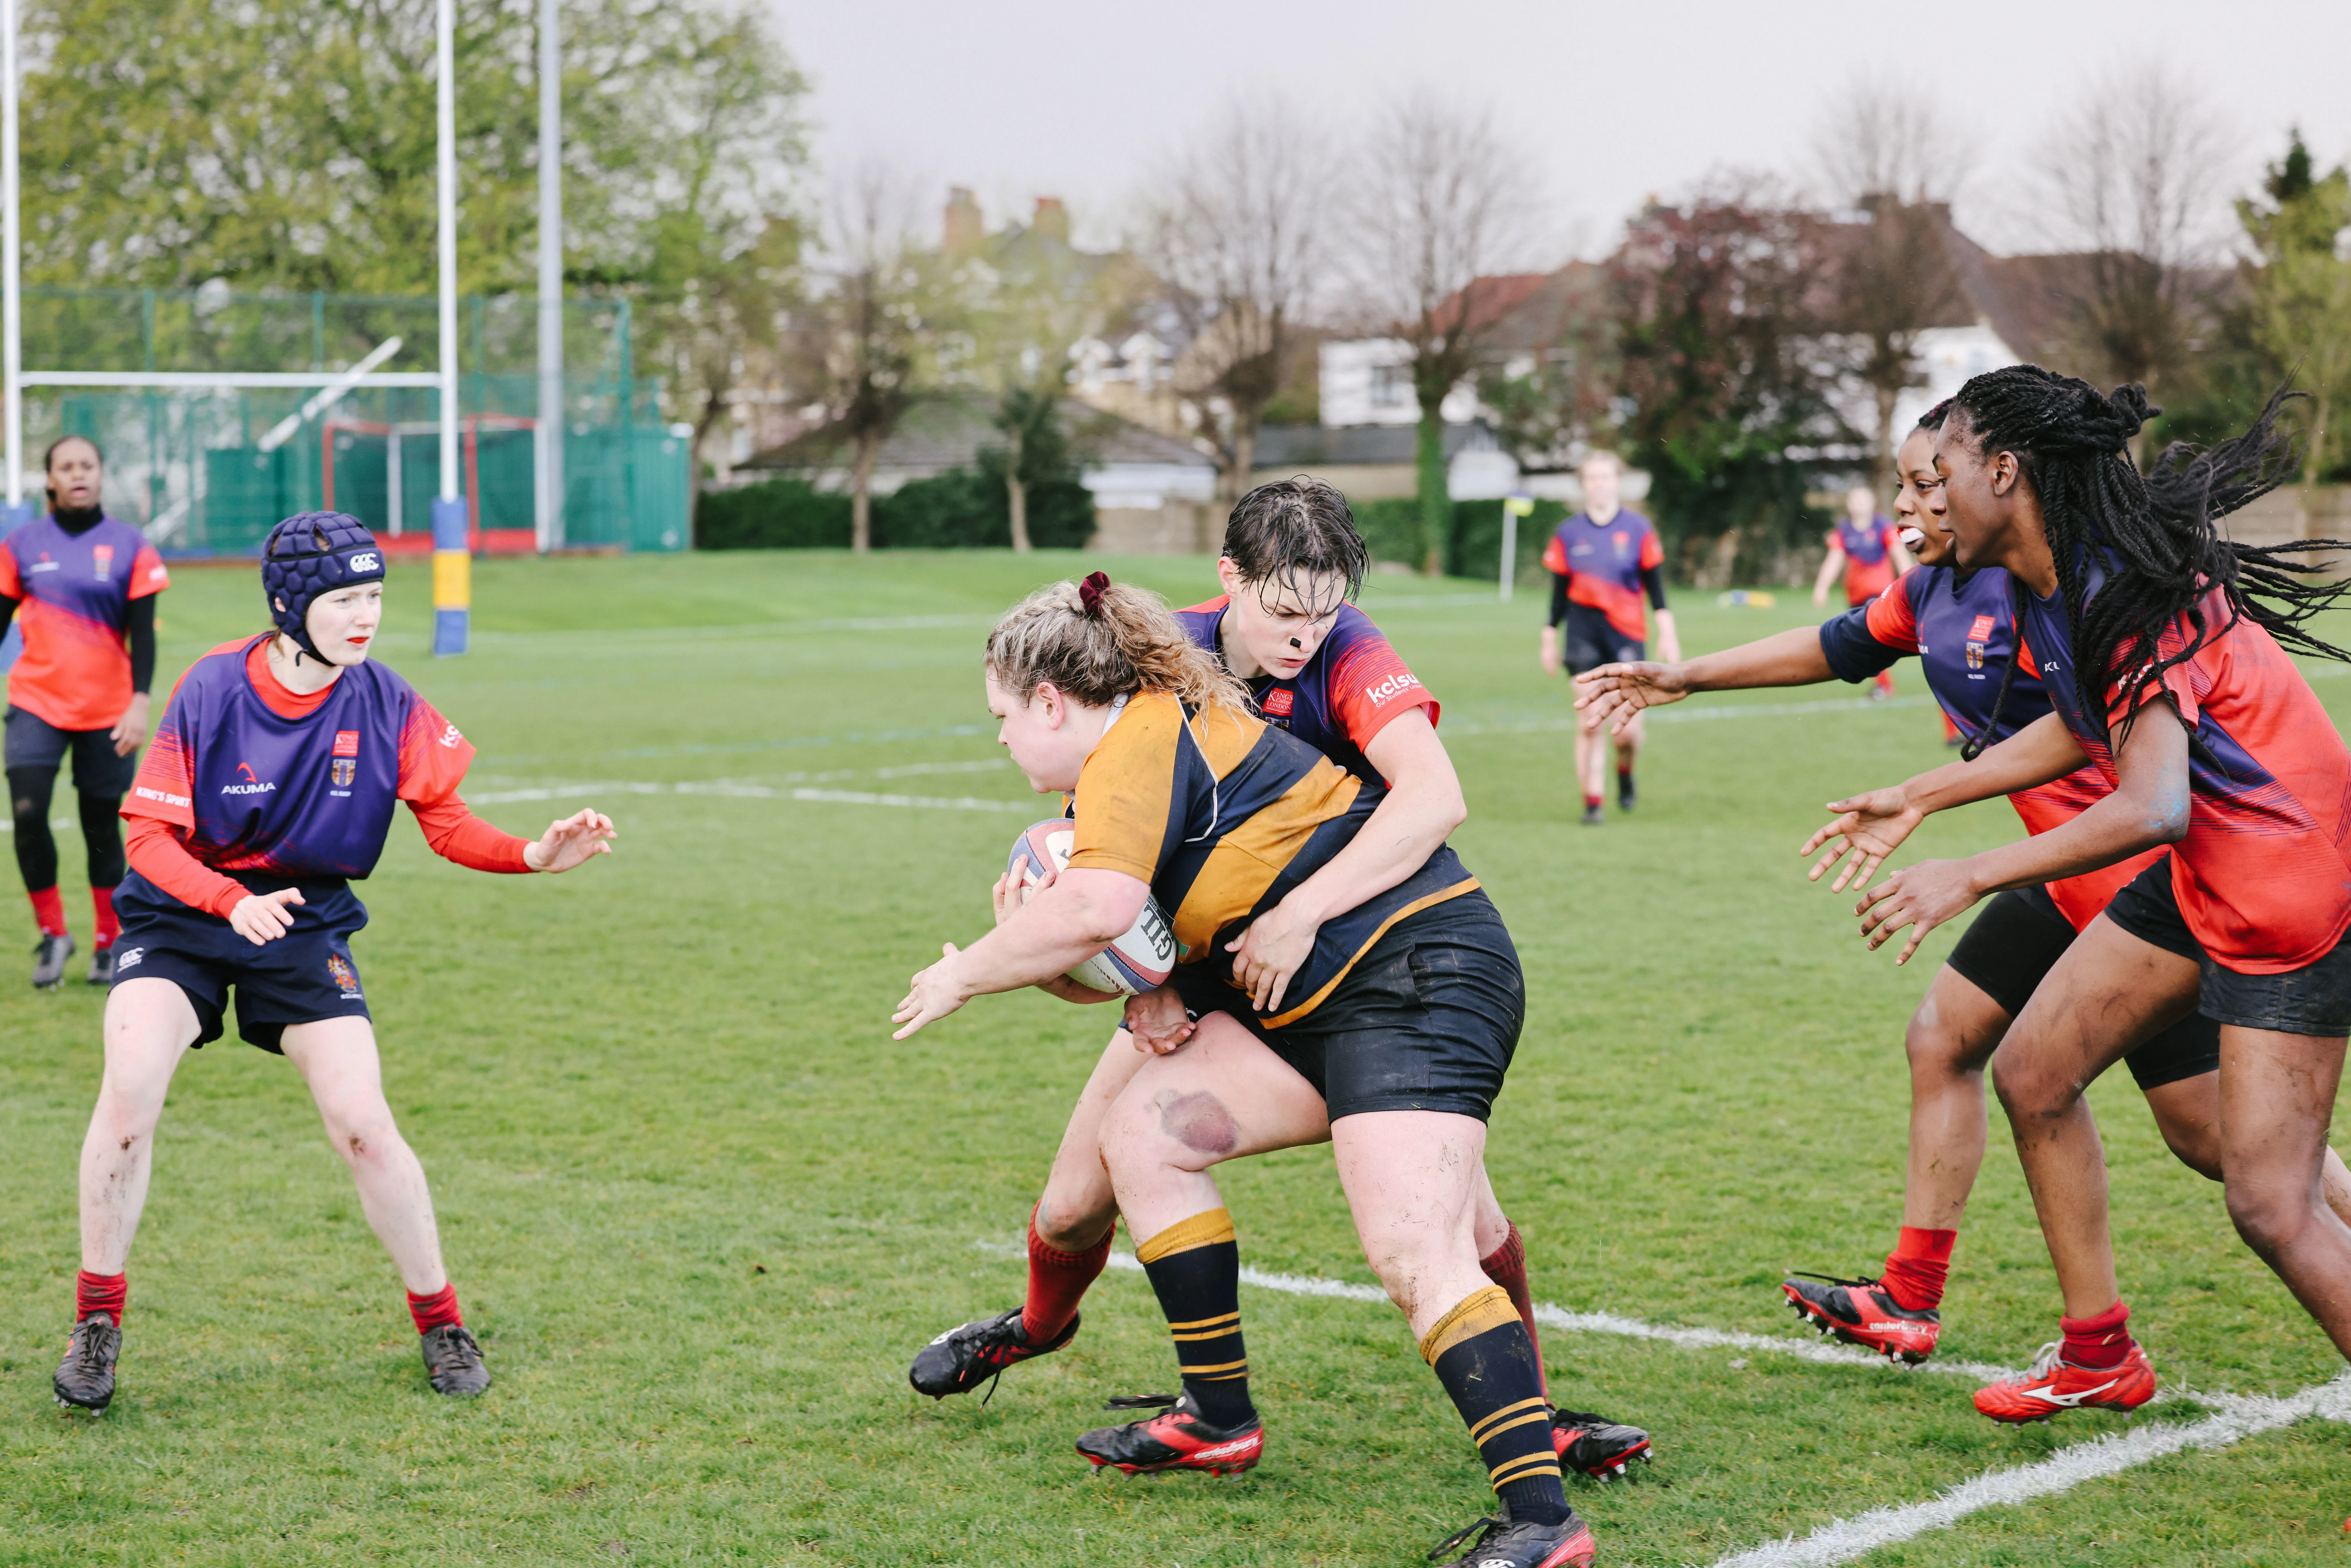 A group of women playing rugby